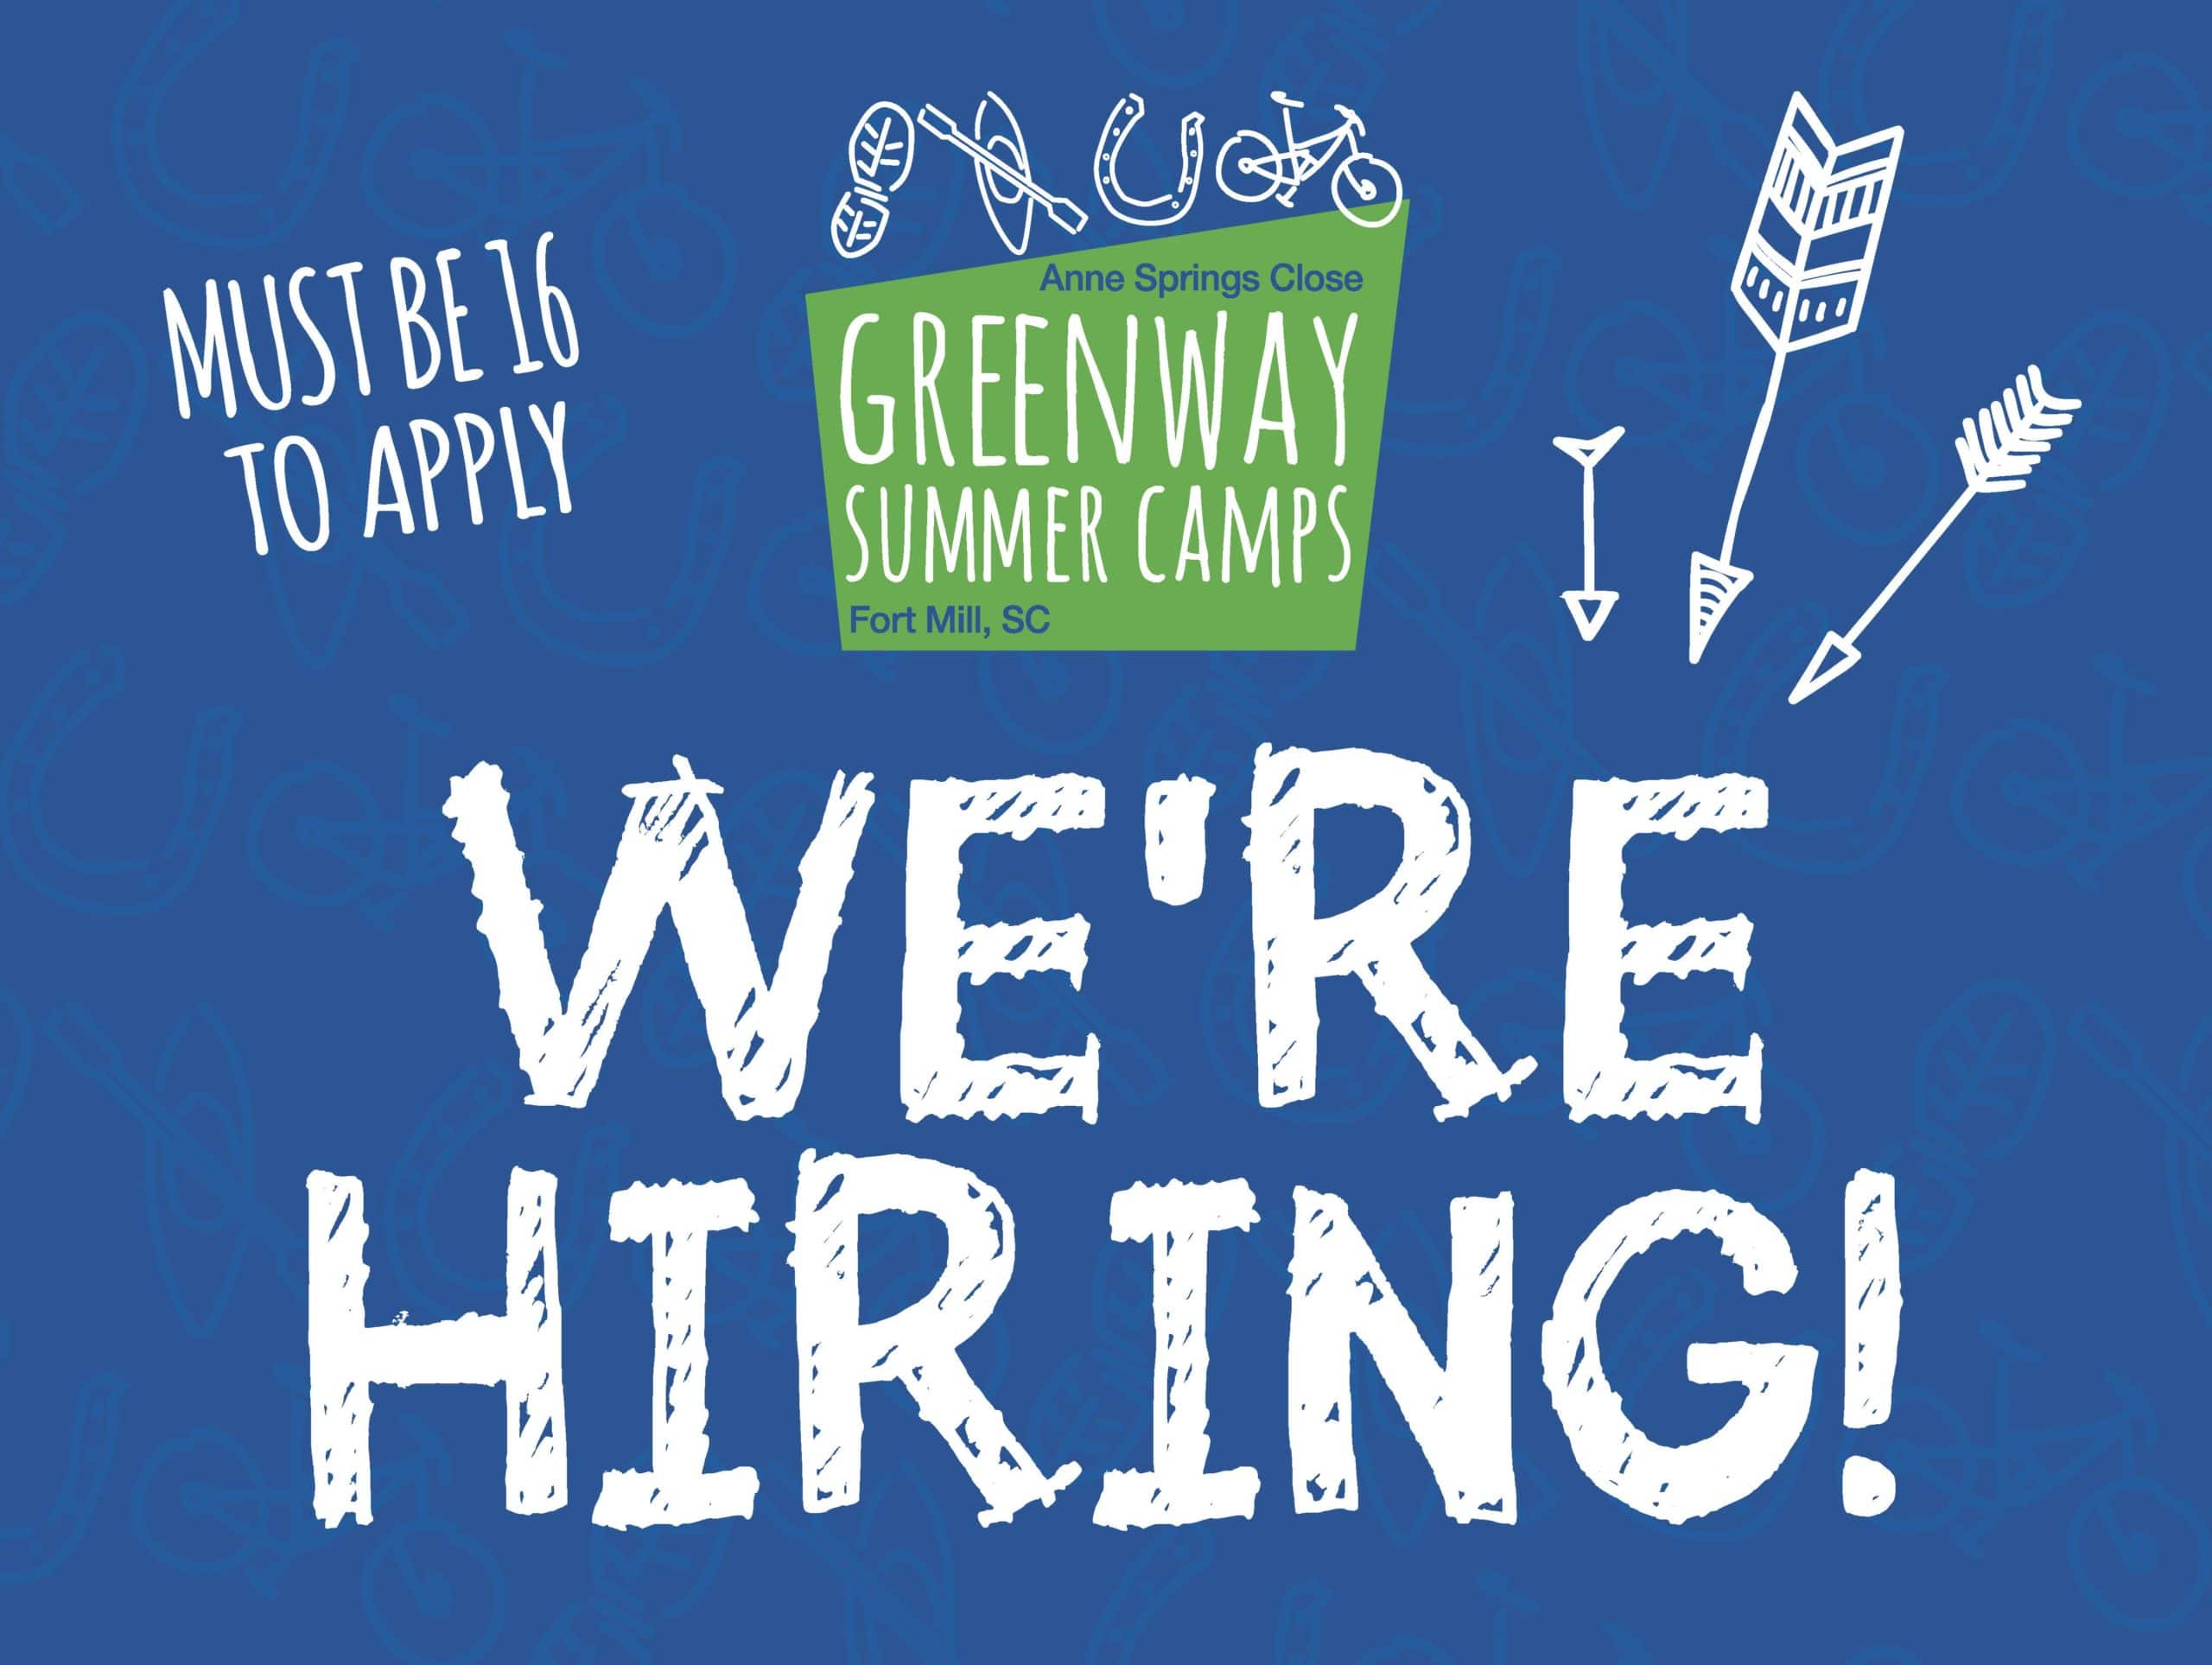 Logo of Anne Springs Close Greenway;s Greenway Summer Camps with text reading "We're hiring, must be 16 to apply"